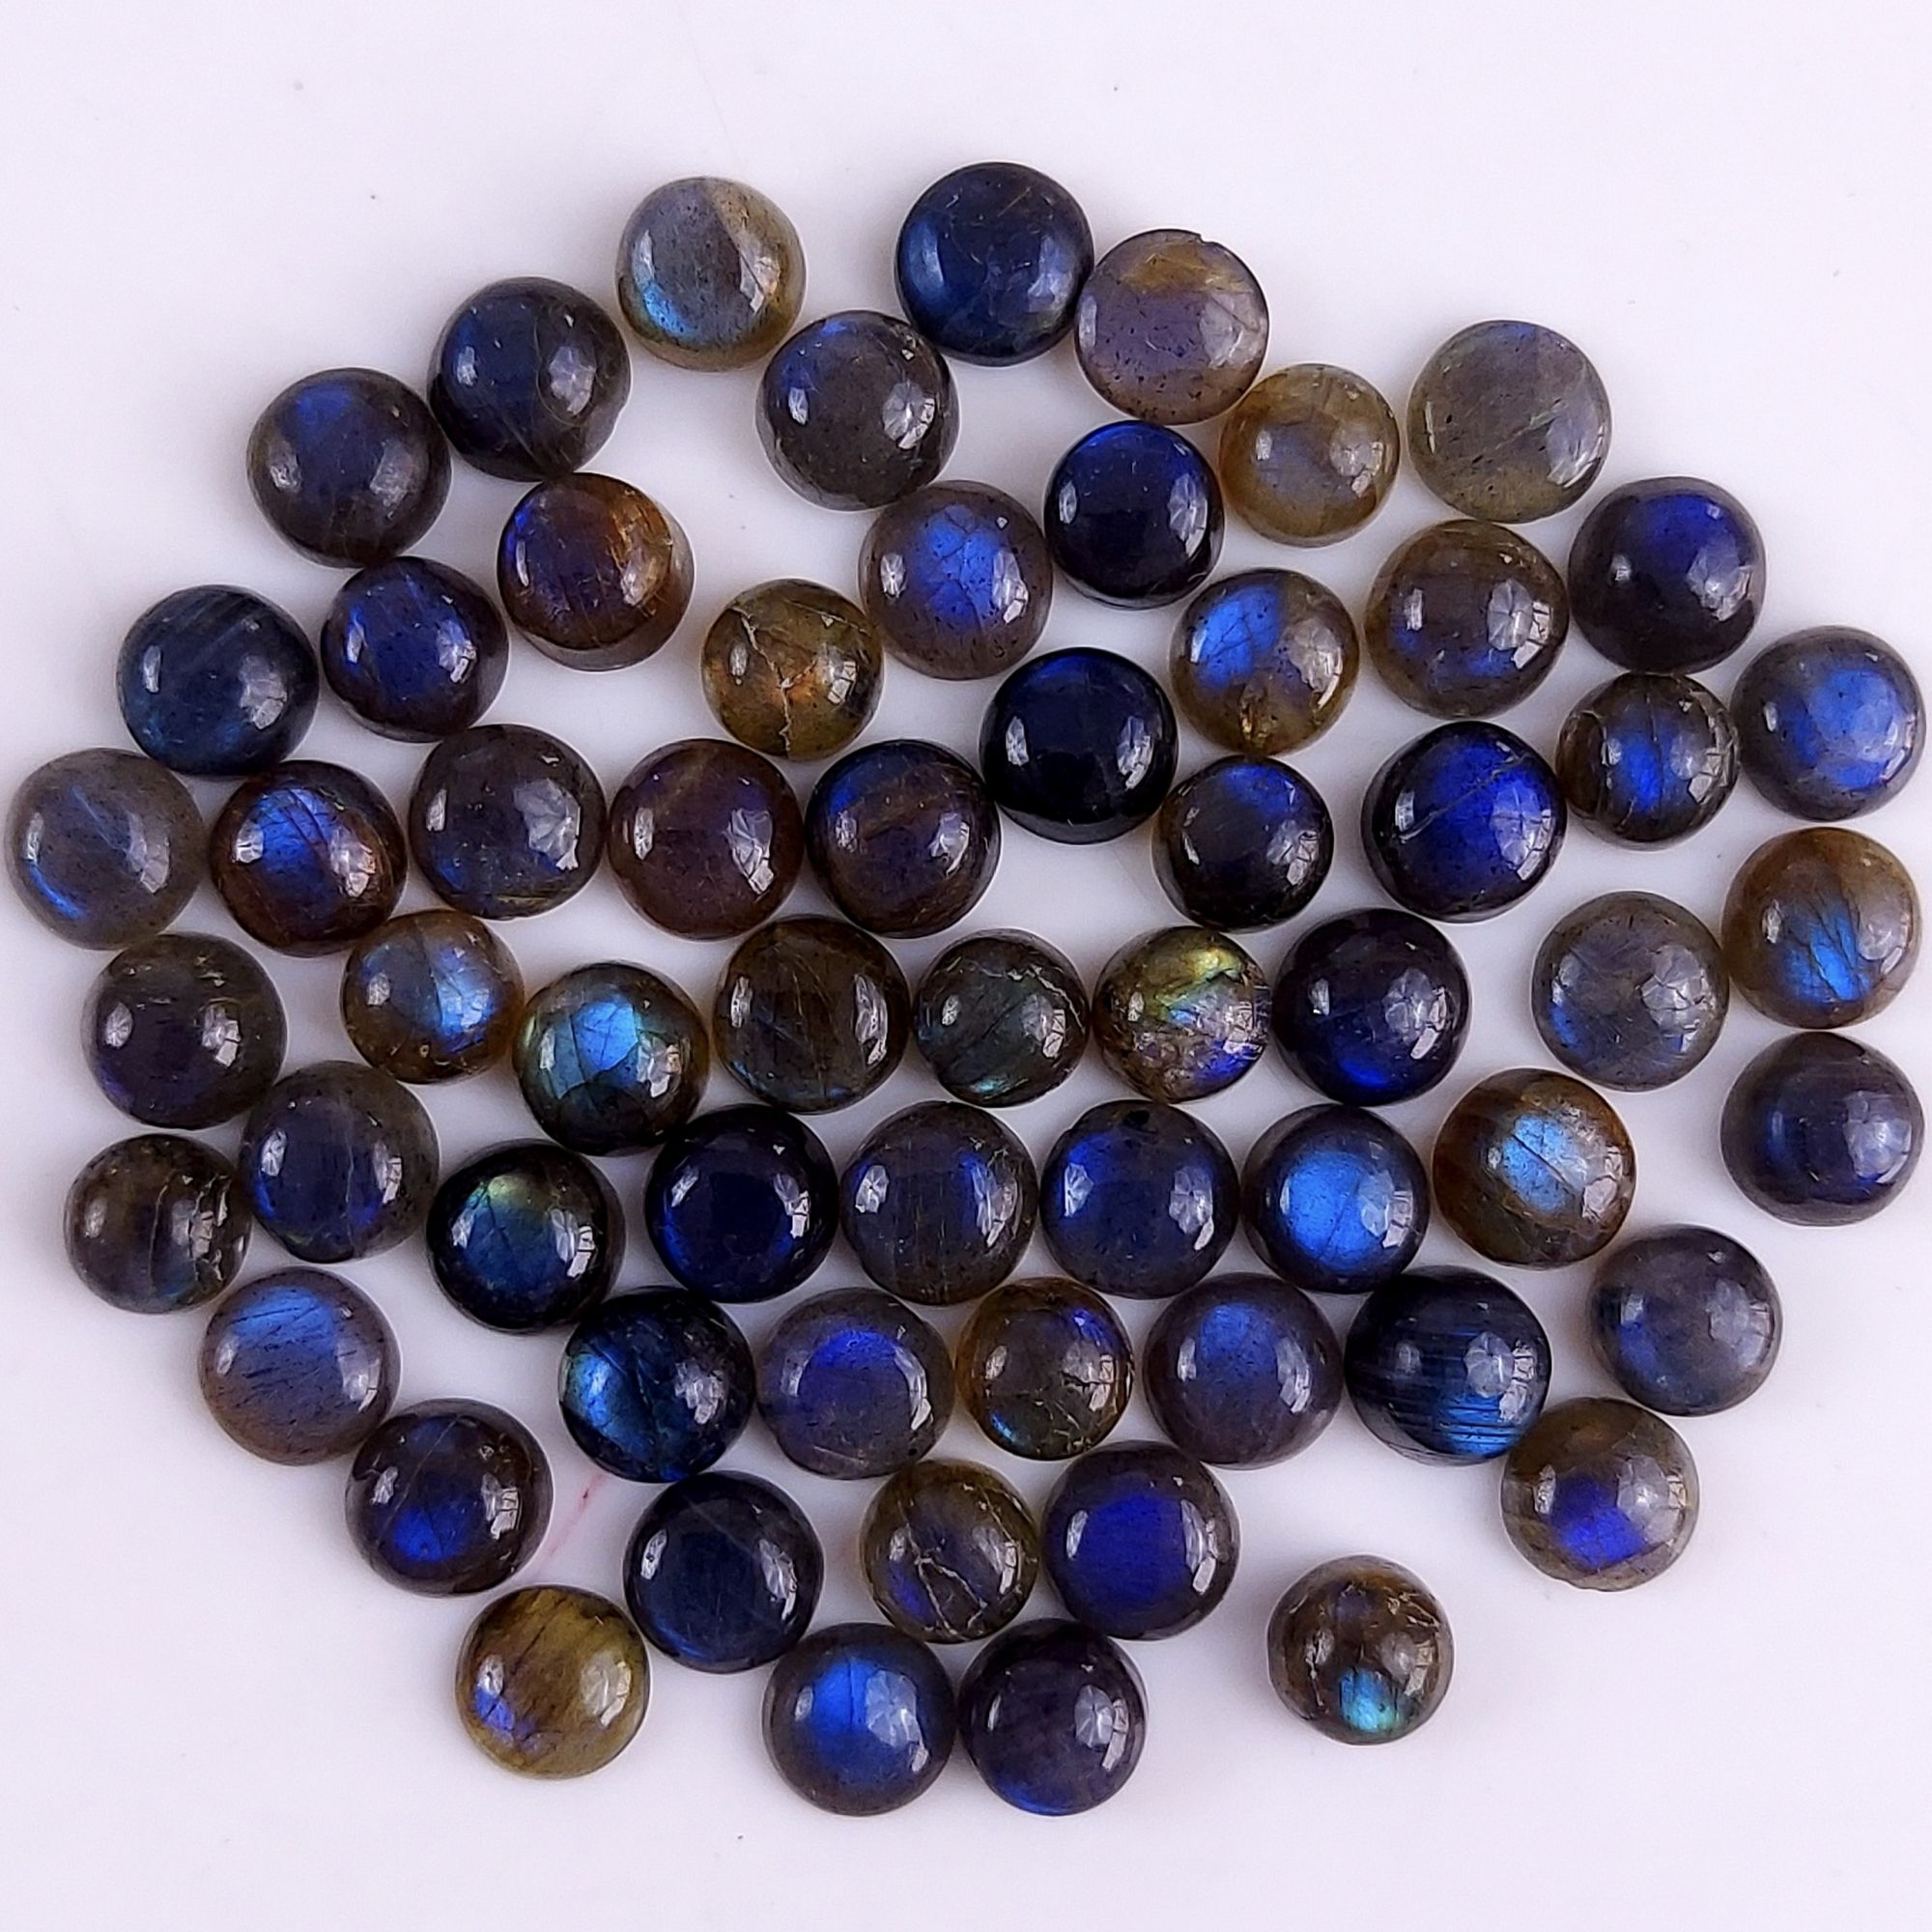 61Pcs 121Cts Natural Blue Labradorite Calibrated Cabochon Round Shape Gemstone Lot For Jewelry Making 6x5mm#733